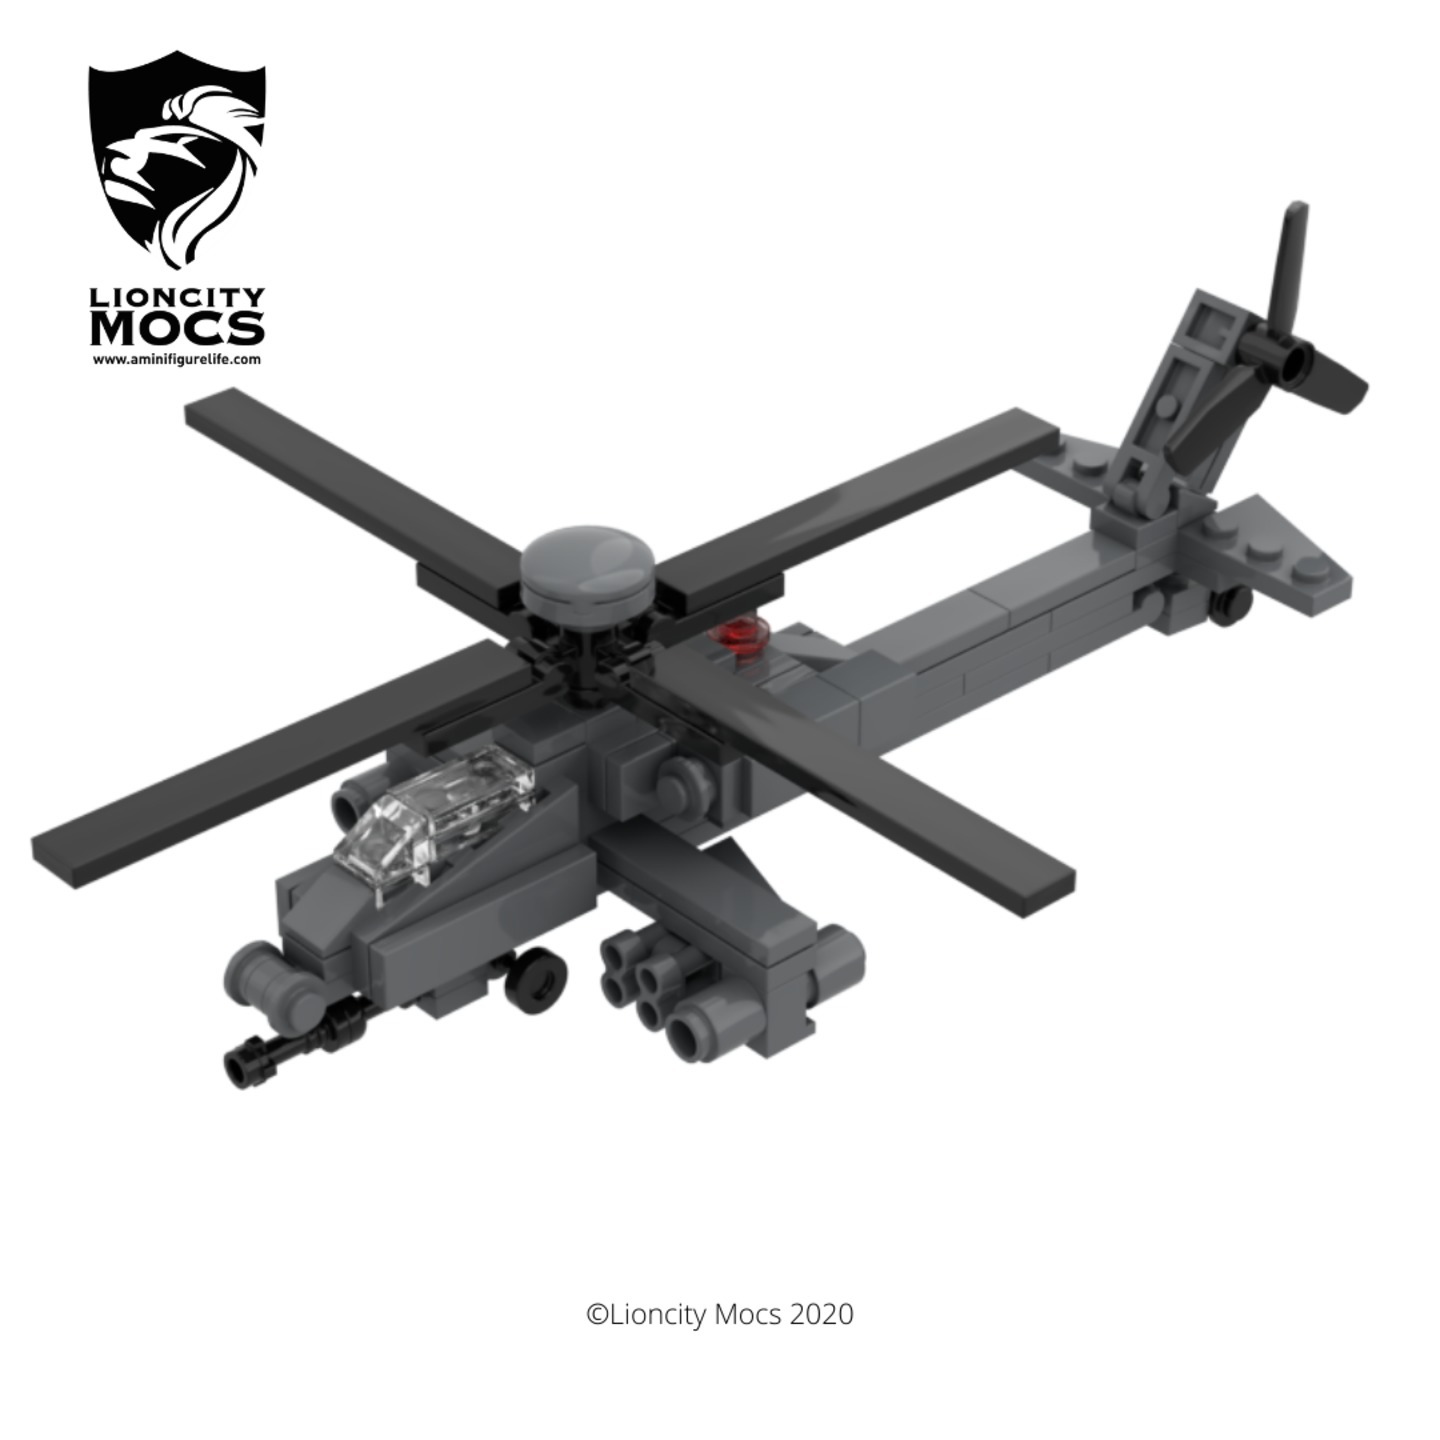  [PDF Instructions Only] AH-64D Apache Helicopter Mini